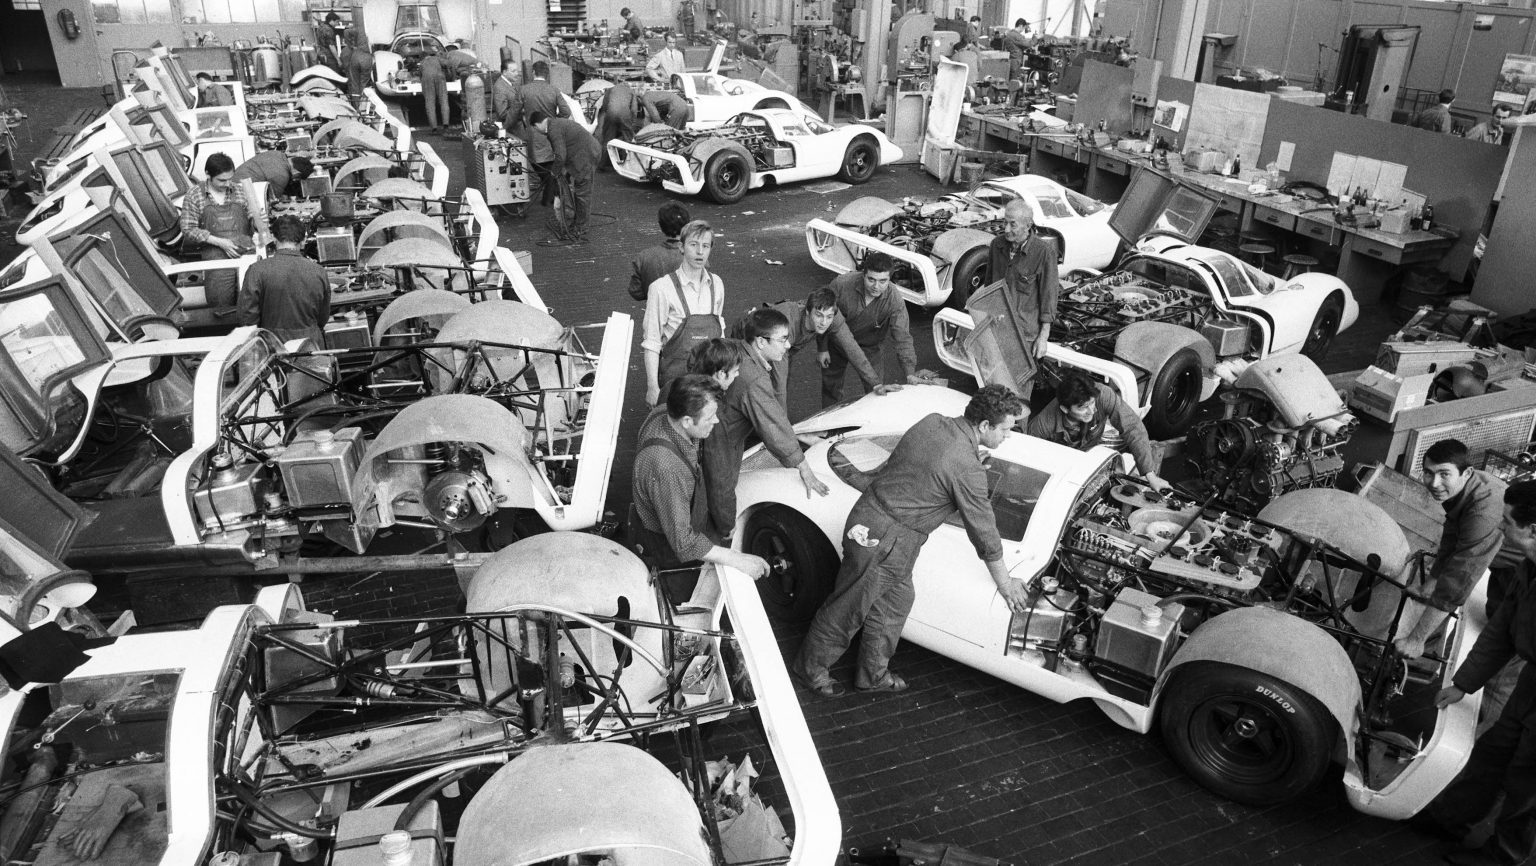 Construction of 25 racing cars for the homologation of the 917 Porsche AG